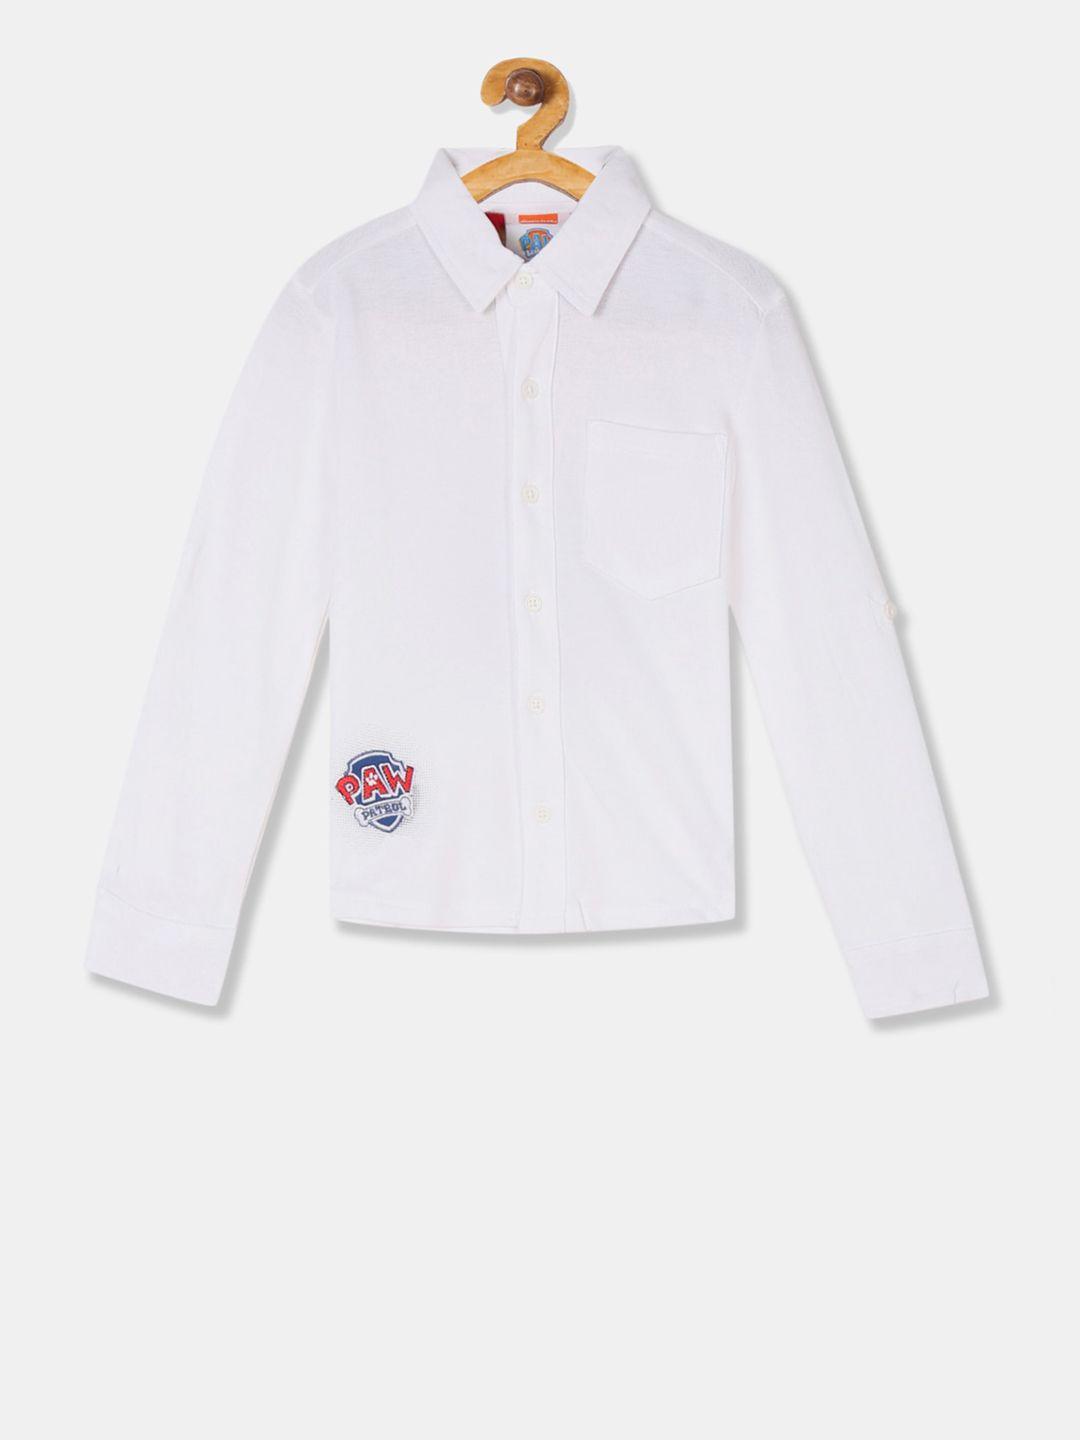 Colt Boys White Regular Fit Solid Casual Shirt